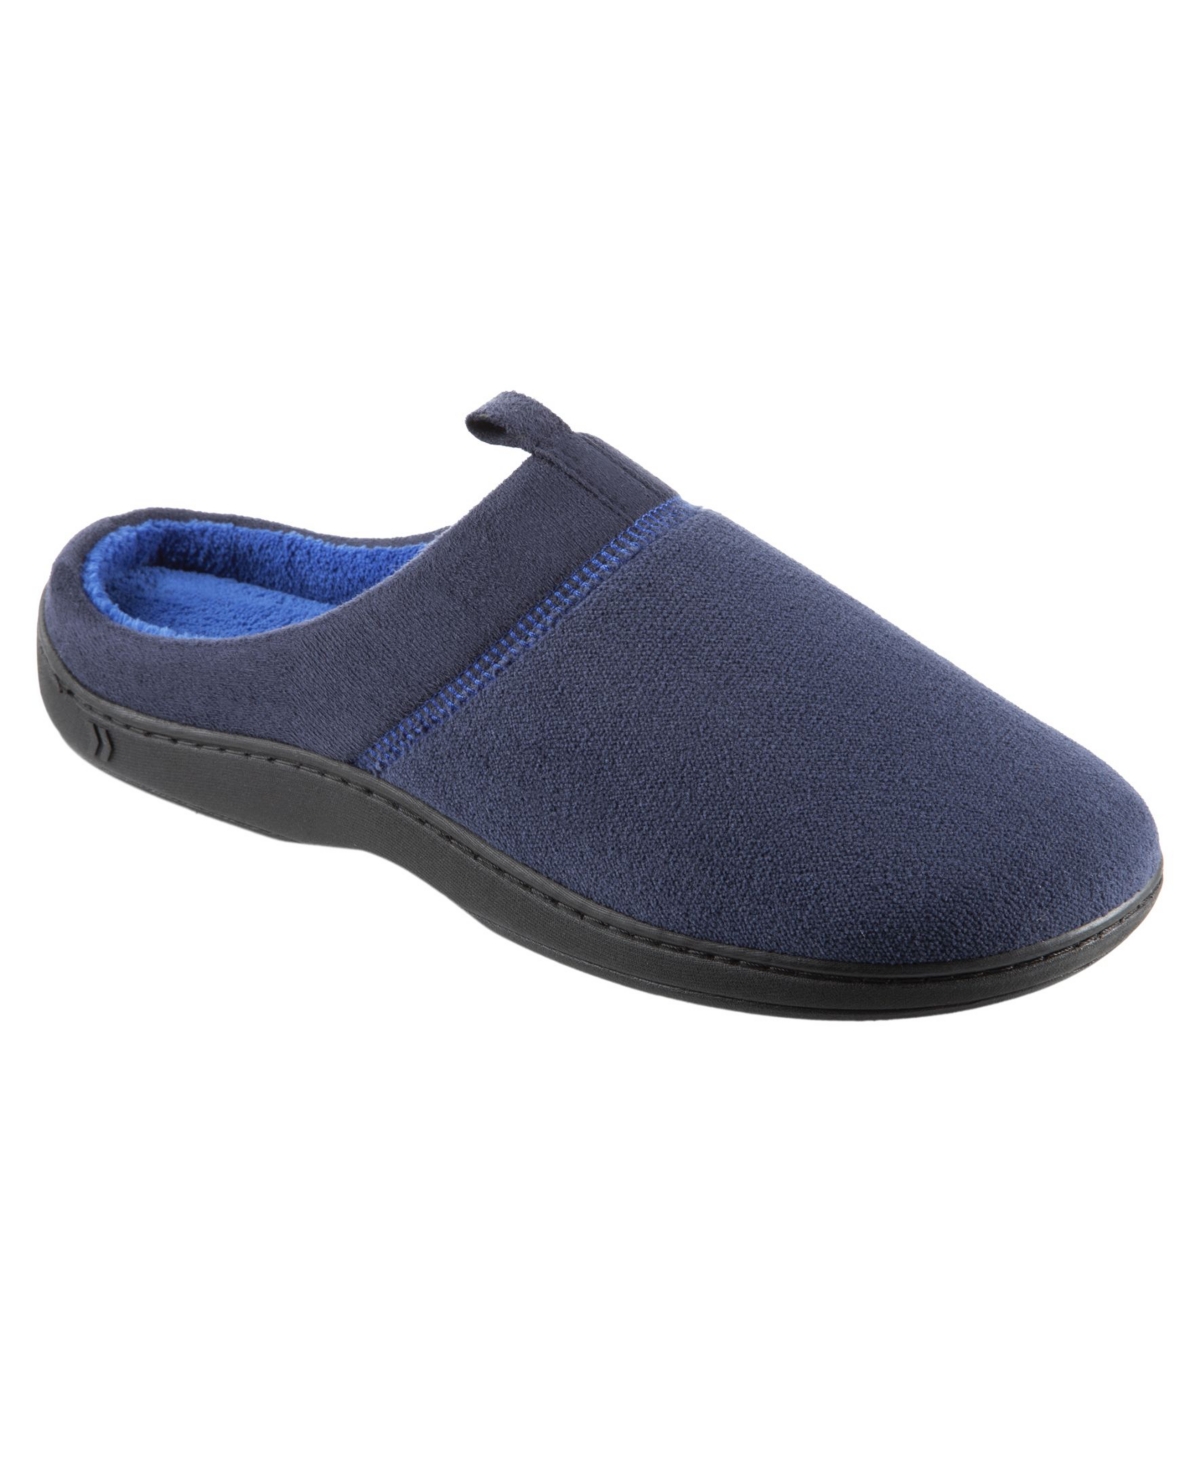 Isotoner Men's Microterry Jared Hoodback Slippers